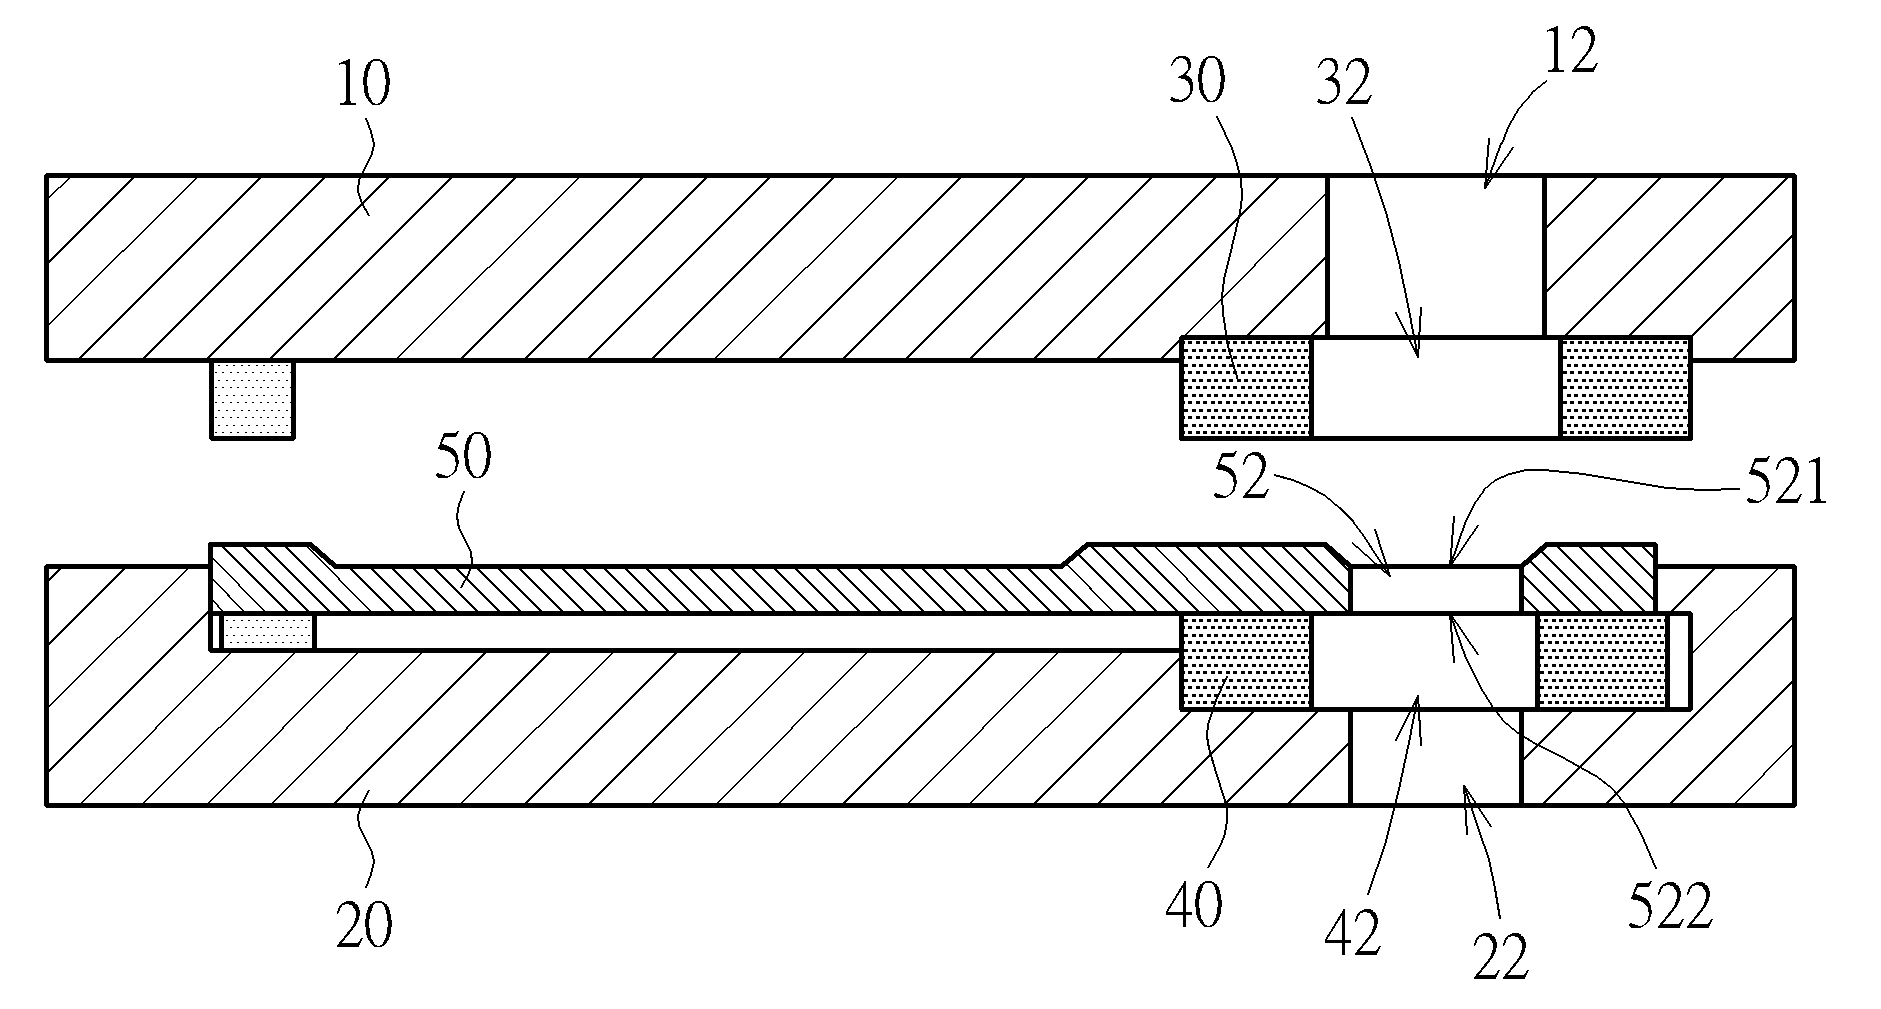 Electroplating equipment capable of gold-plating on a through hole of a workpiece